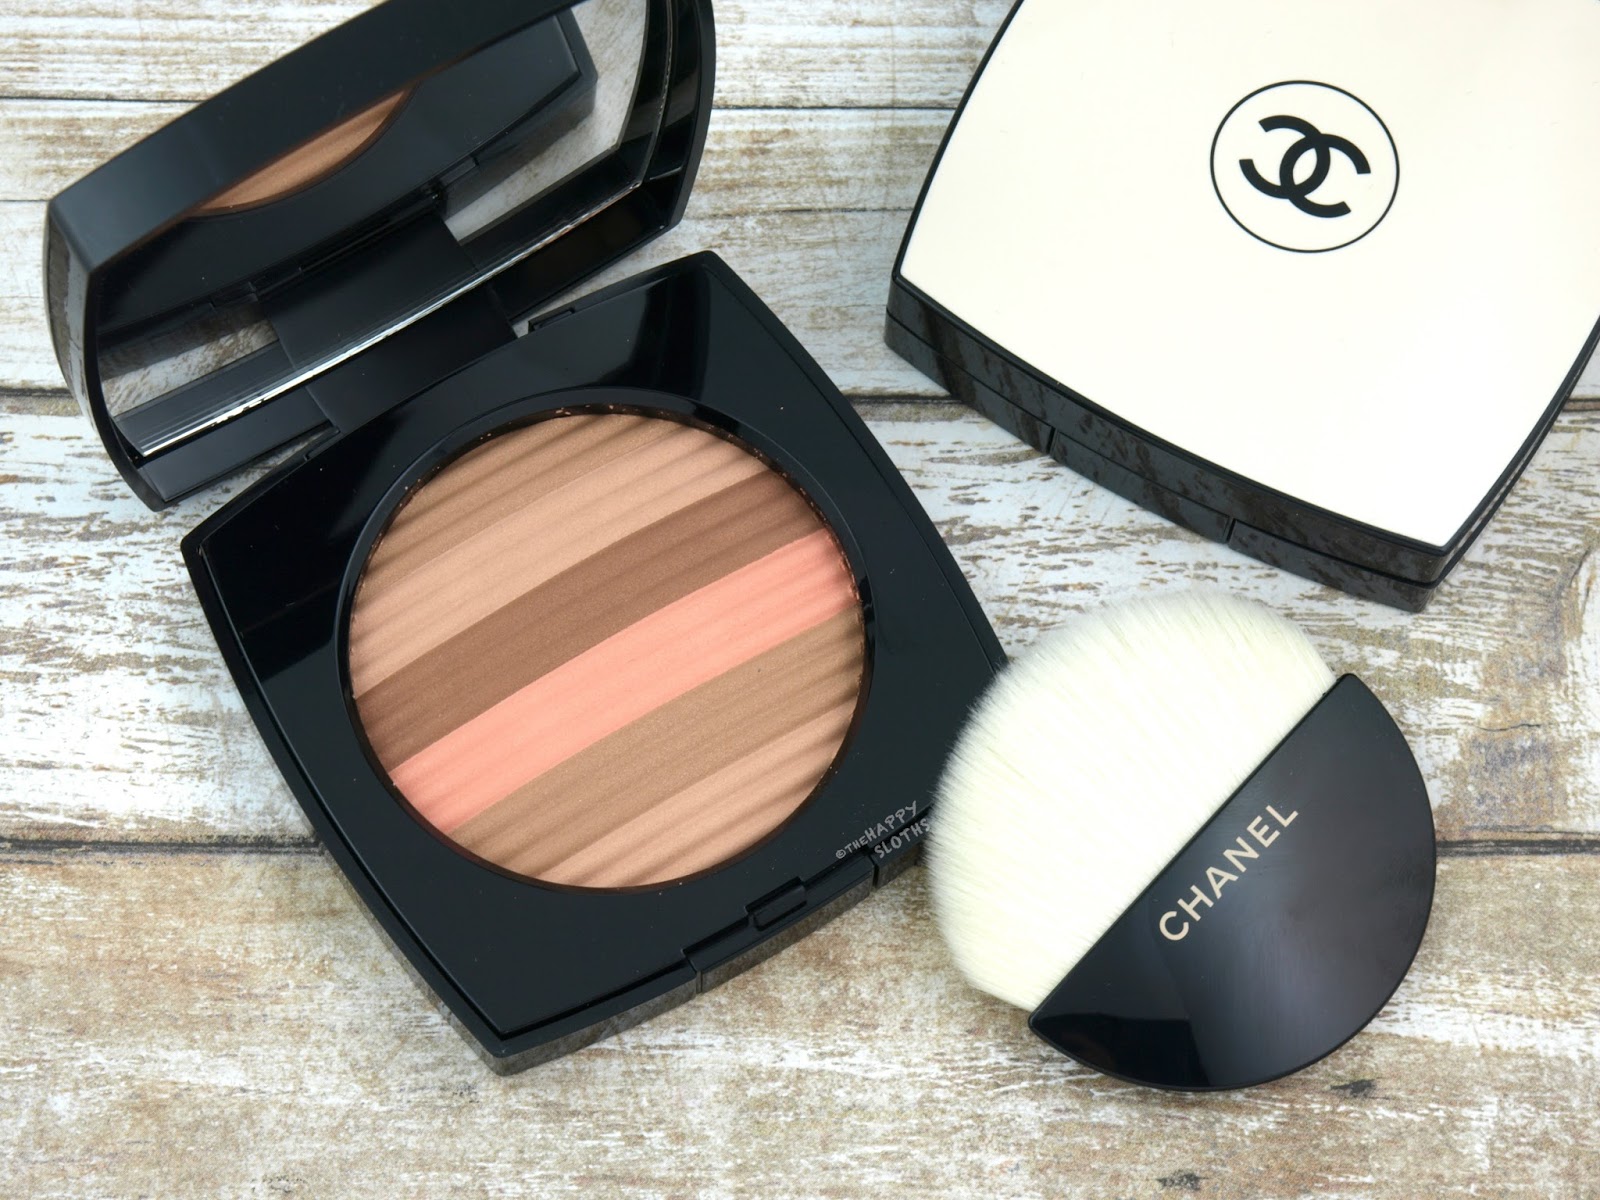 Chanel Les Beiges 2018 Collection: Review and Swatches